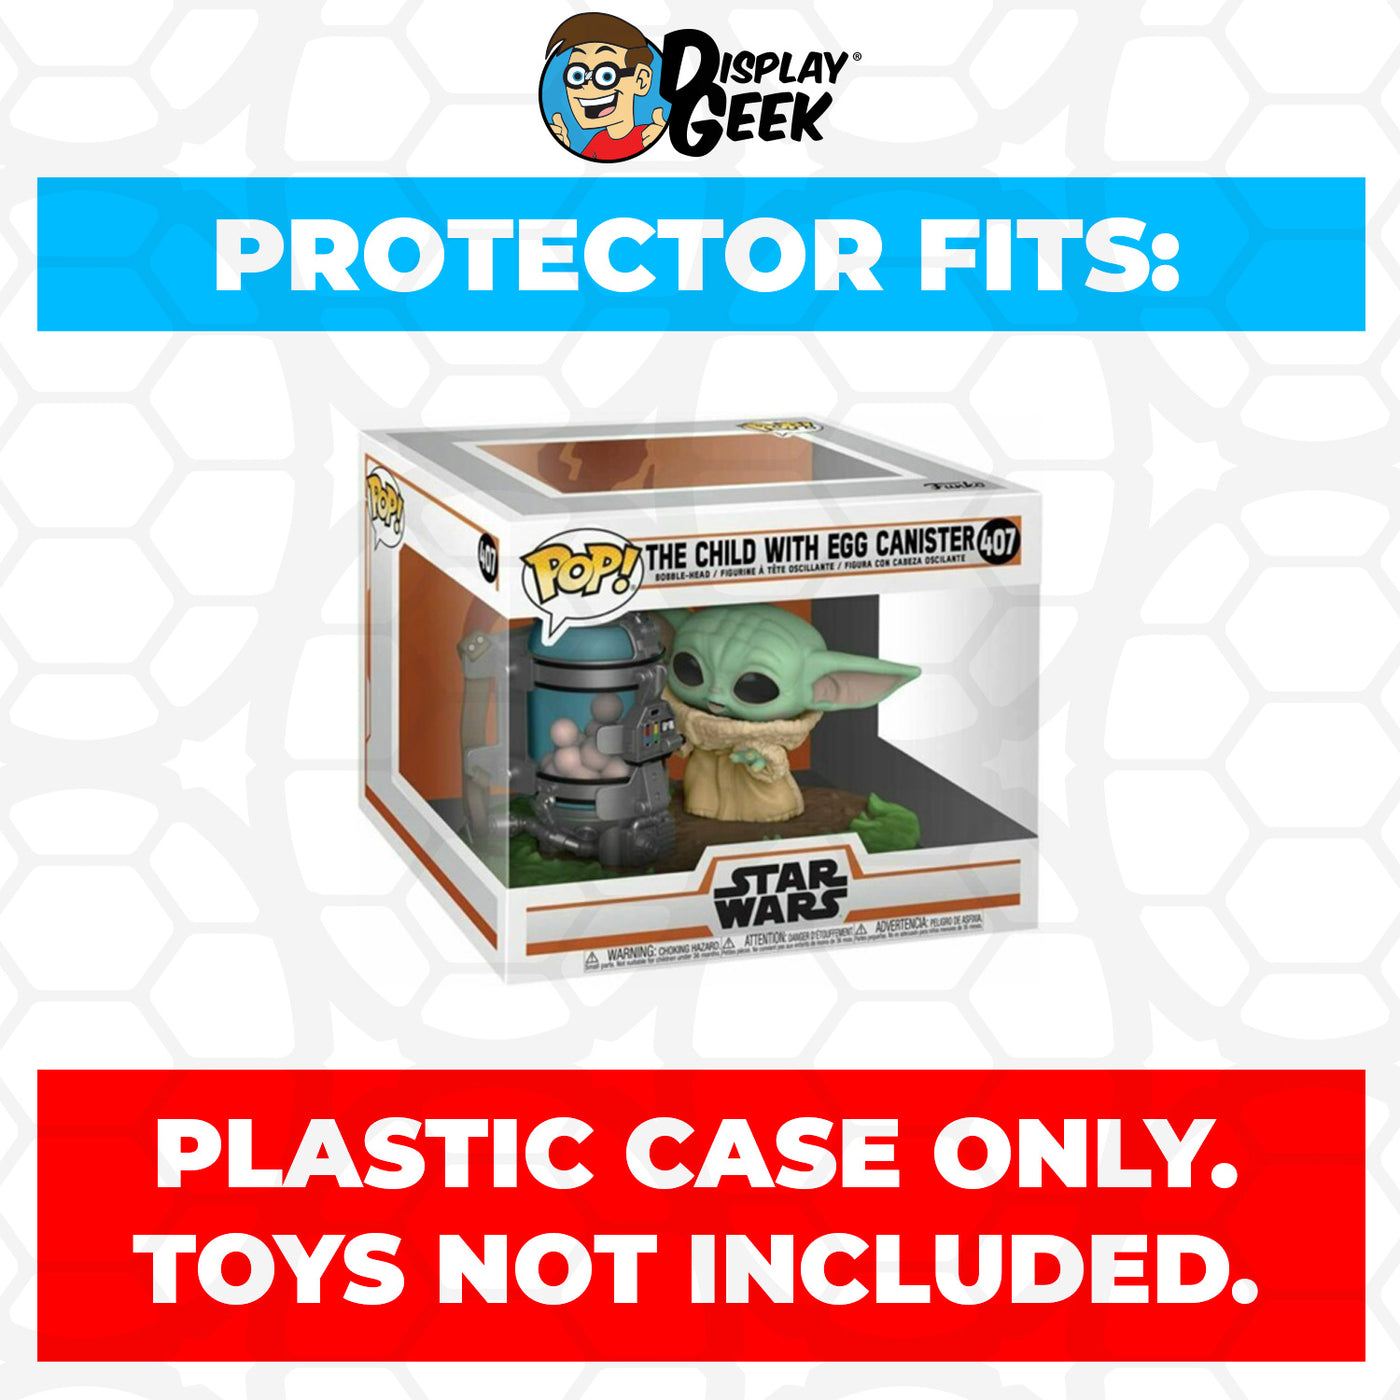 Pop Protector for The Child with Egg Canister #407 Funko Pop Deluxe on The Protector Guide App by Display Geek